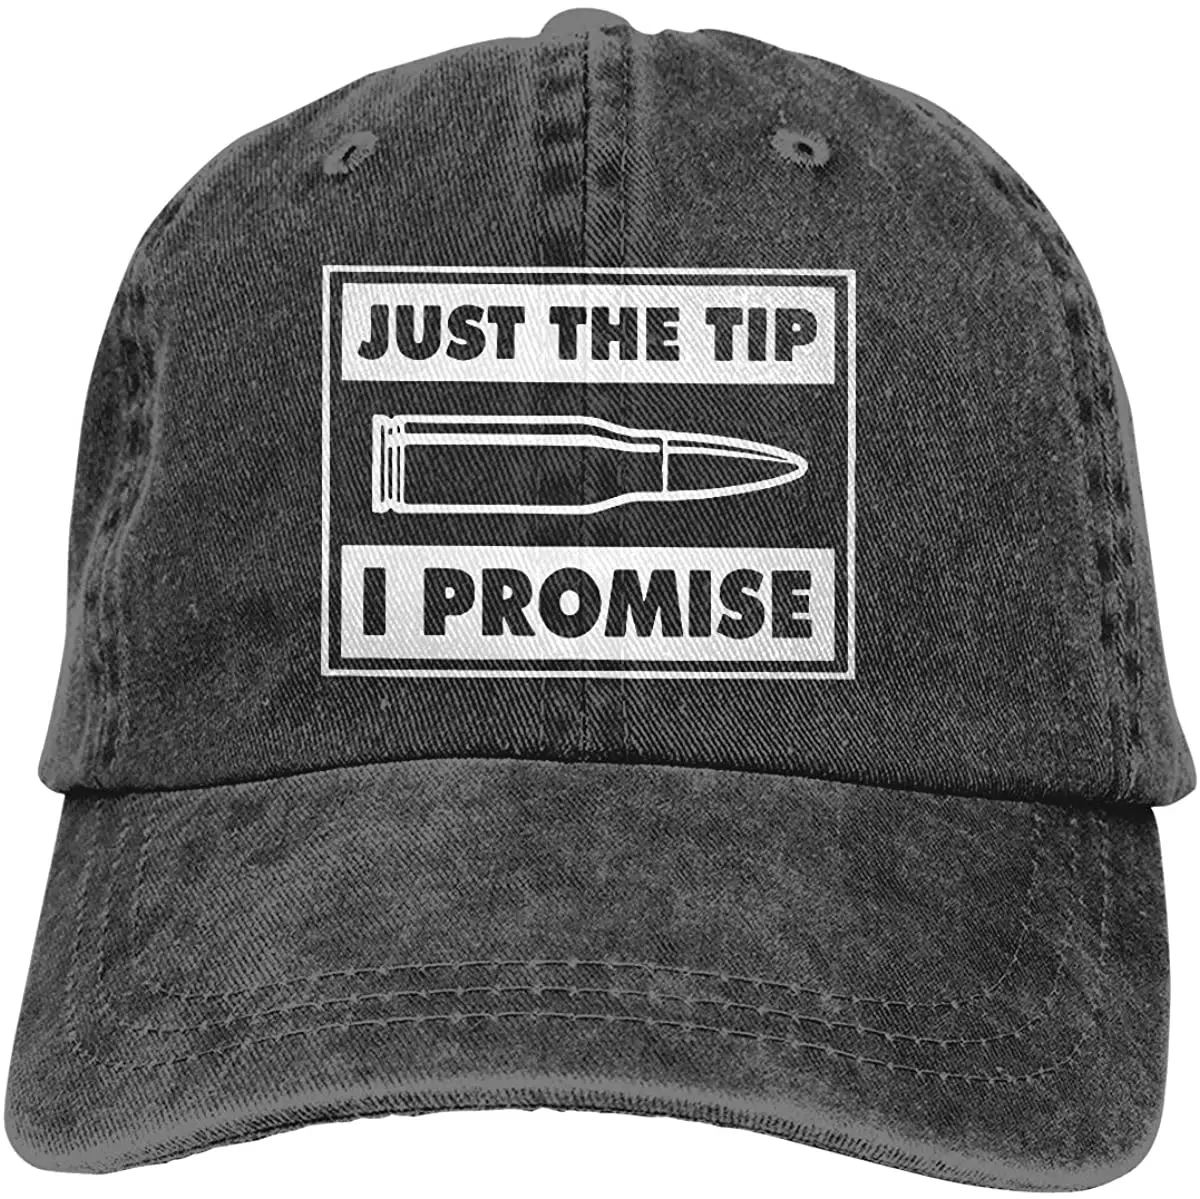 

Unisex Just The Tip Vintage Washed Twill Baseball Caps Adjustable Hats Funny Humor Irony Graphics Of Adult Gift Black